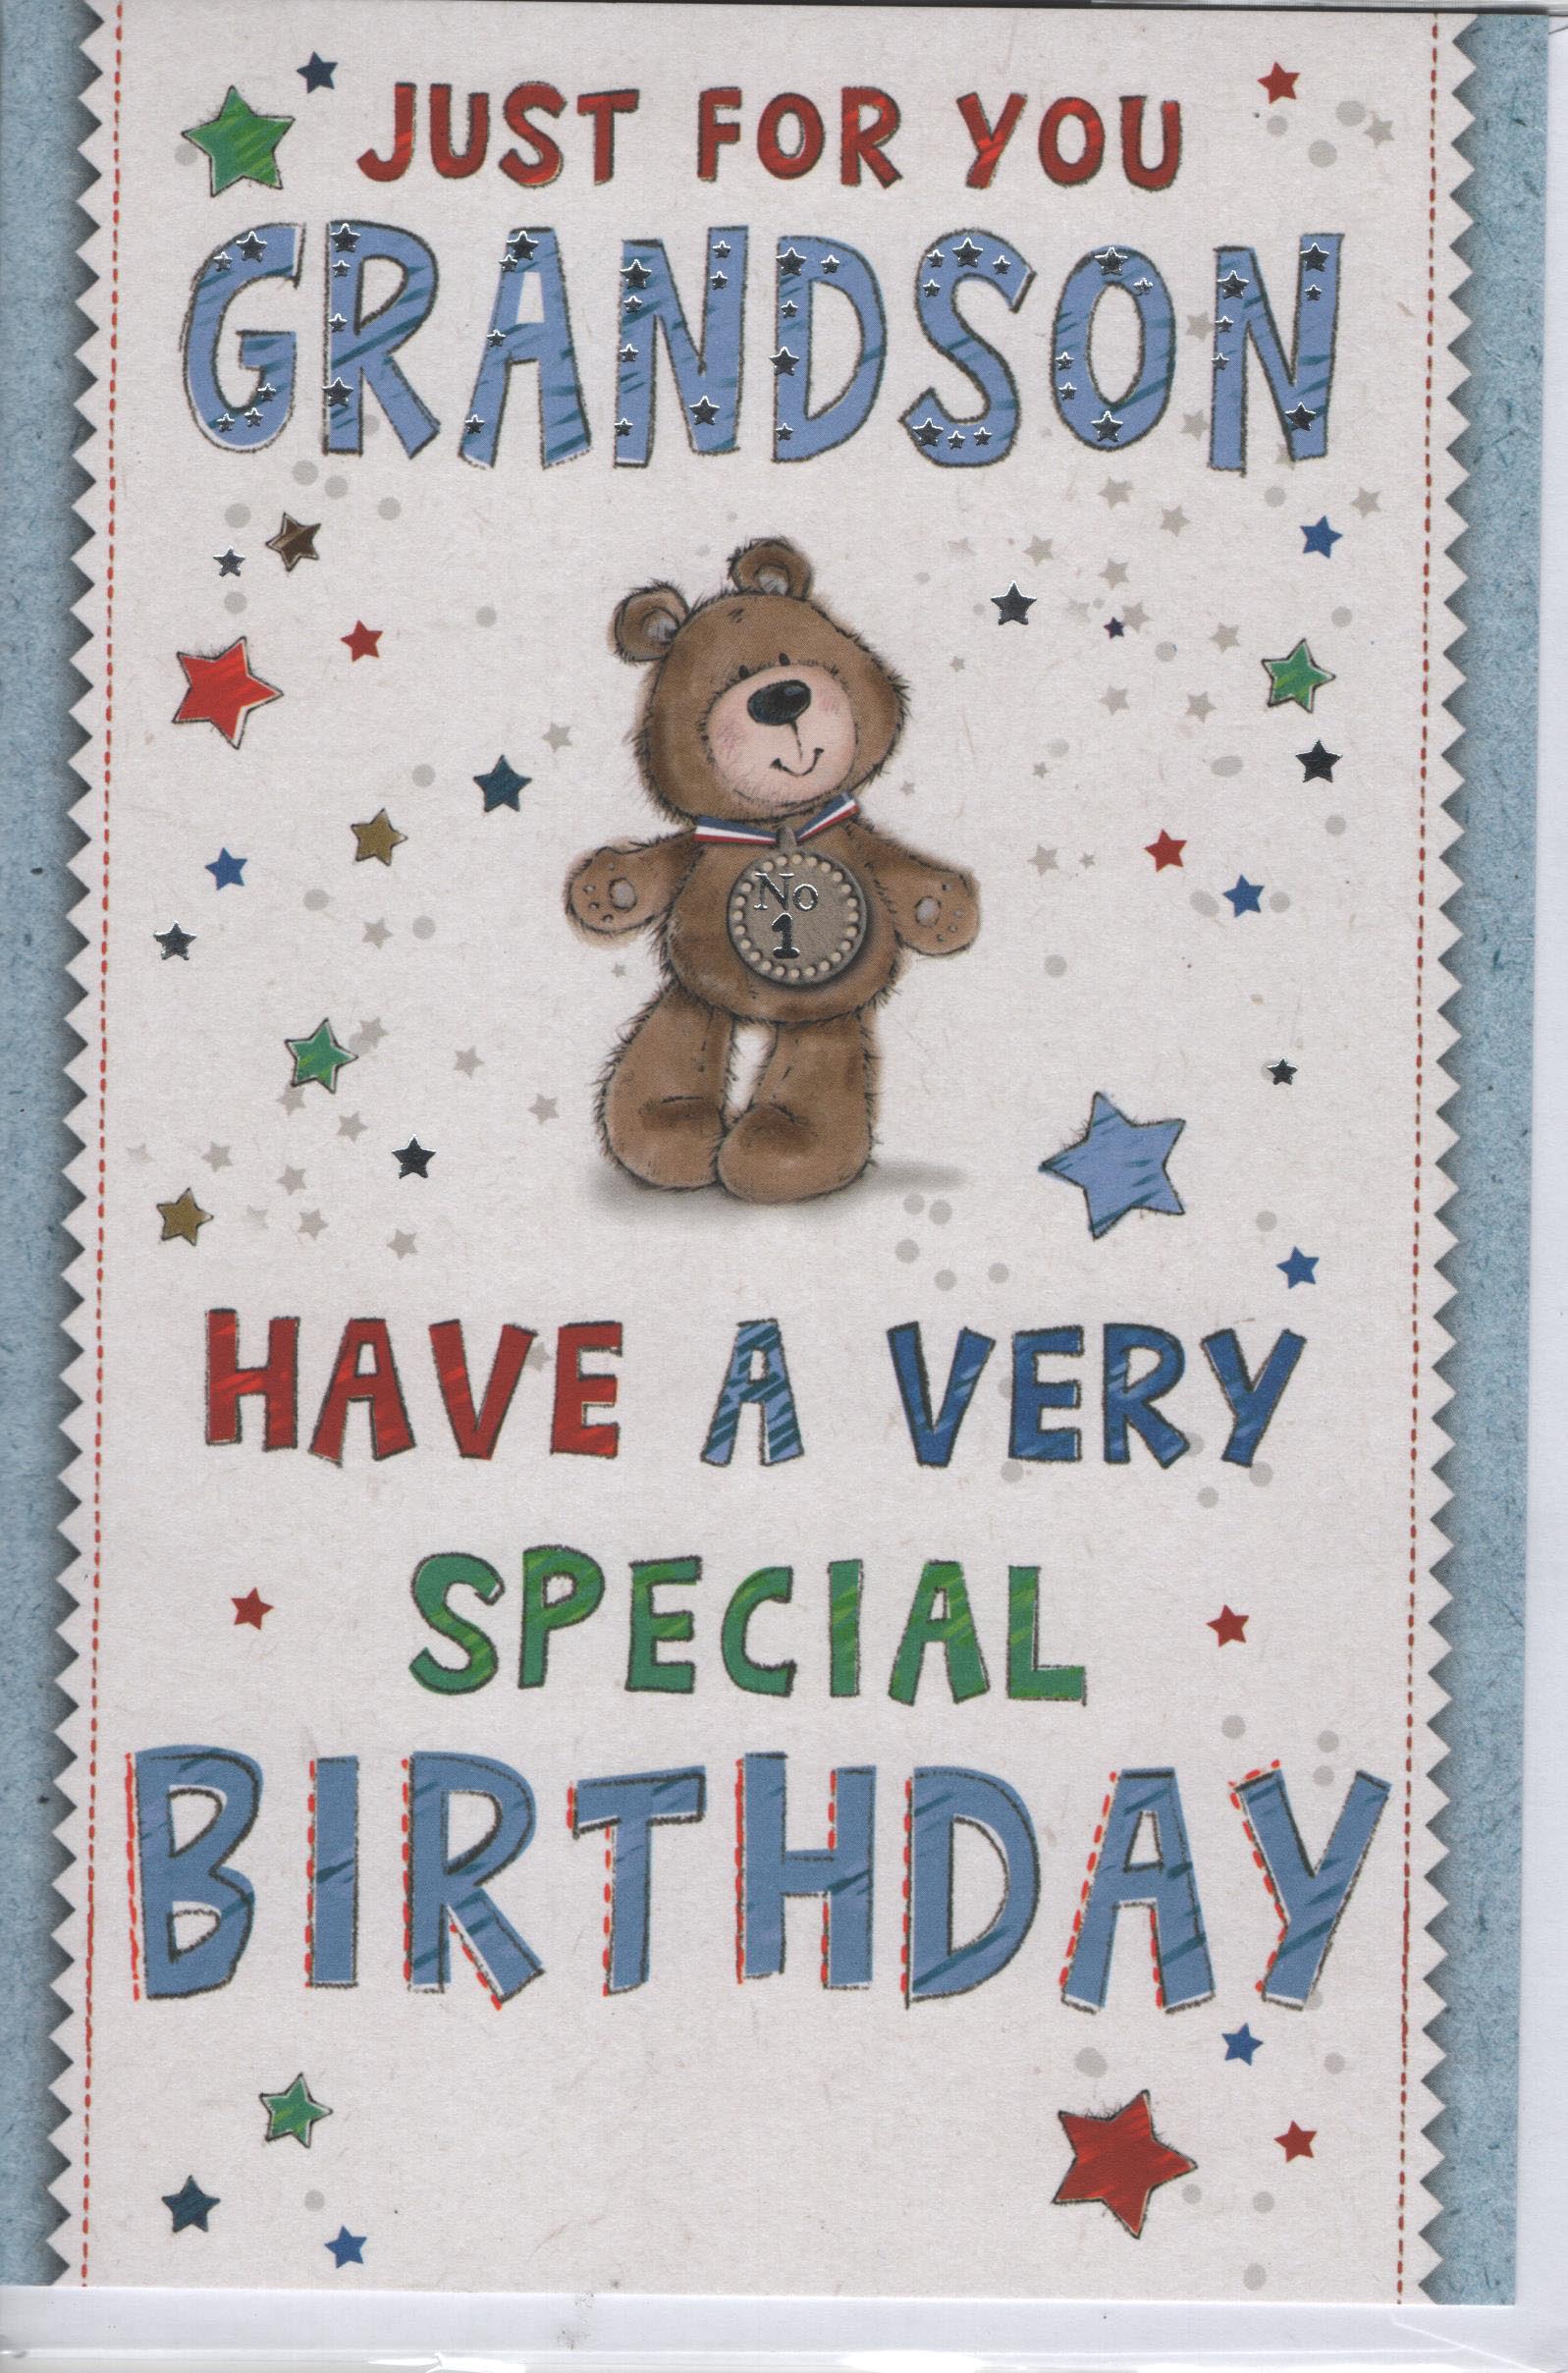 Just for you grandson have a very special birthday